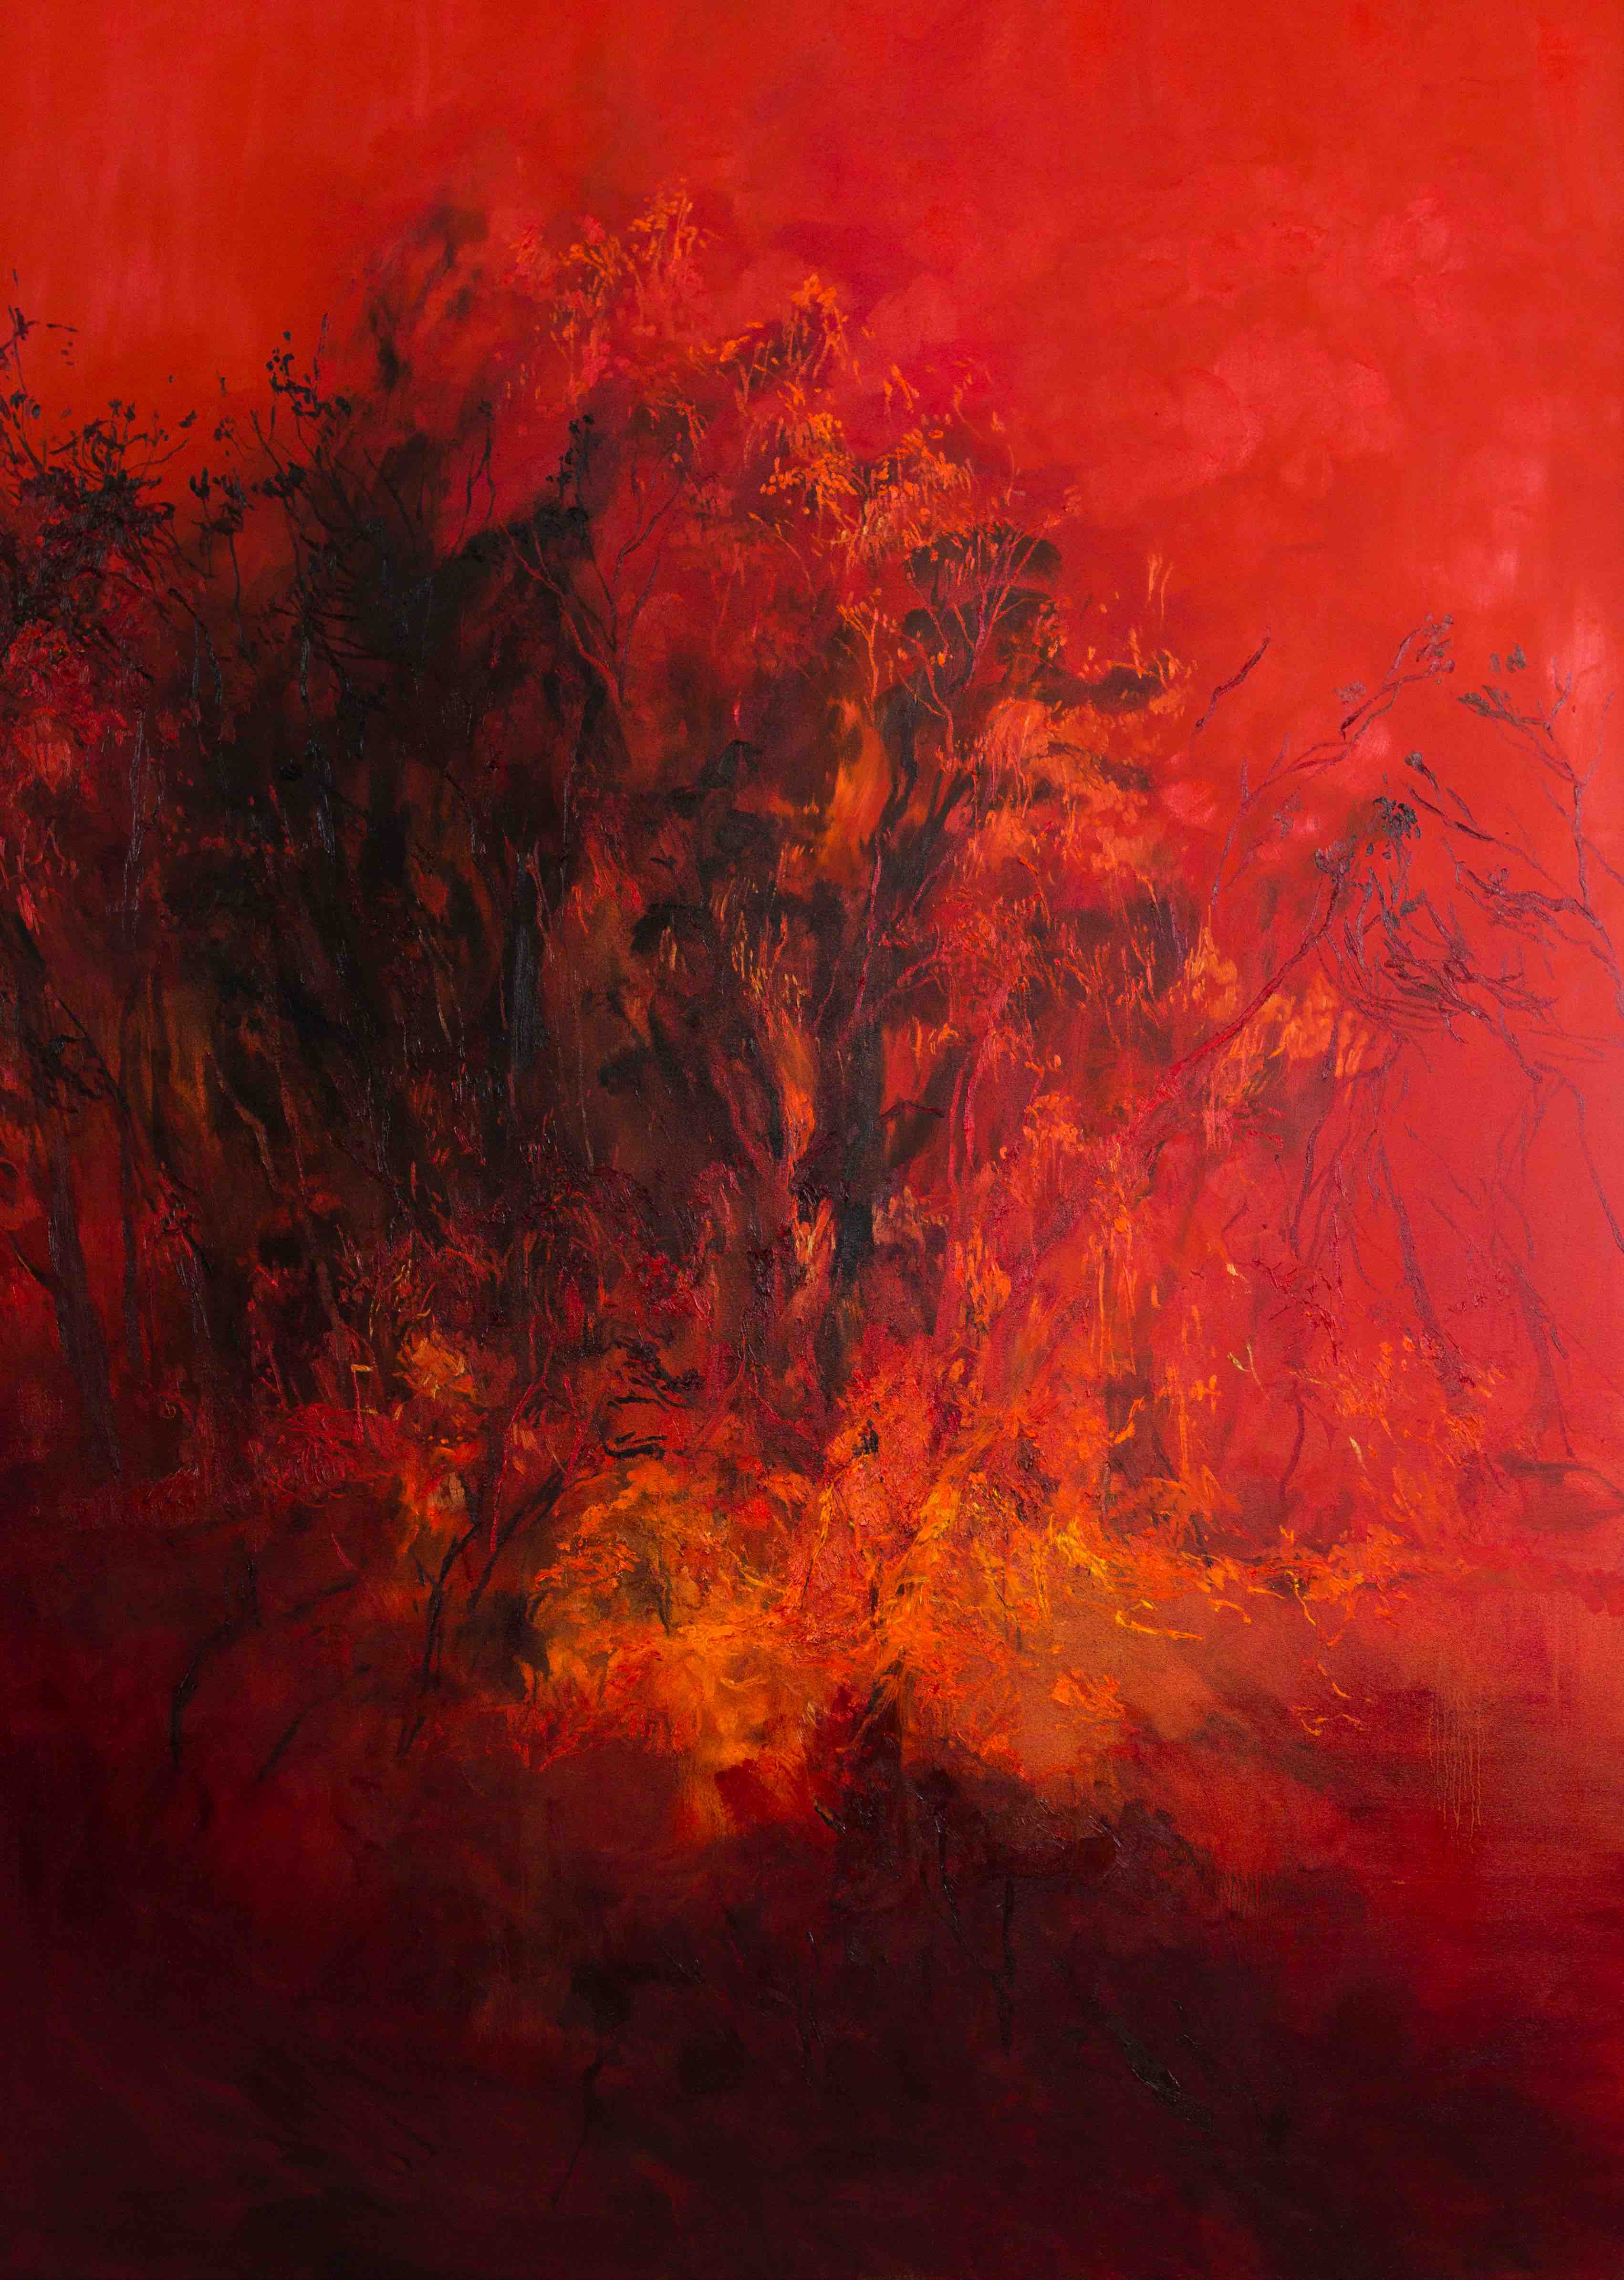 oil on canvas (180 x 131cm) private collection